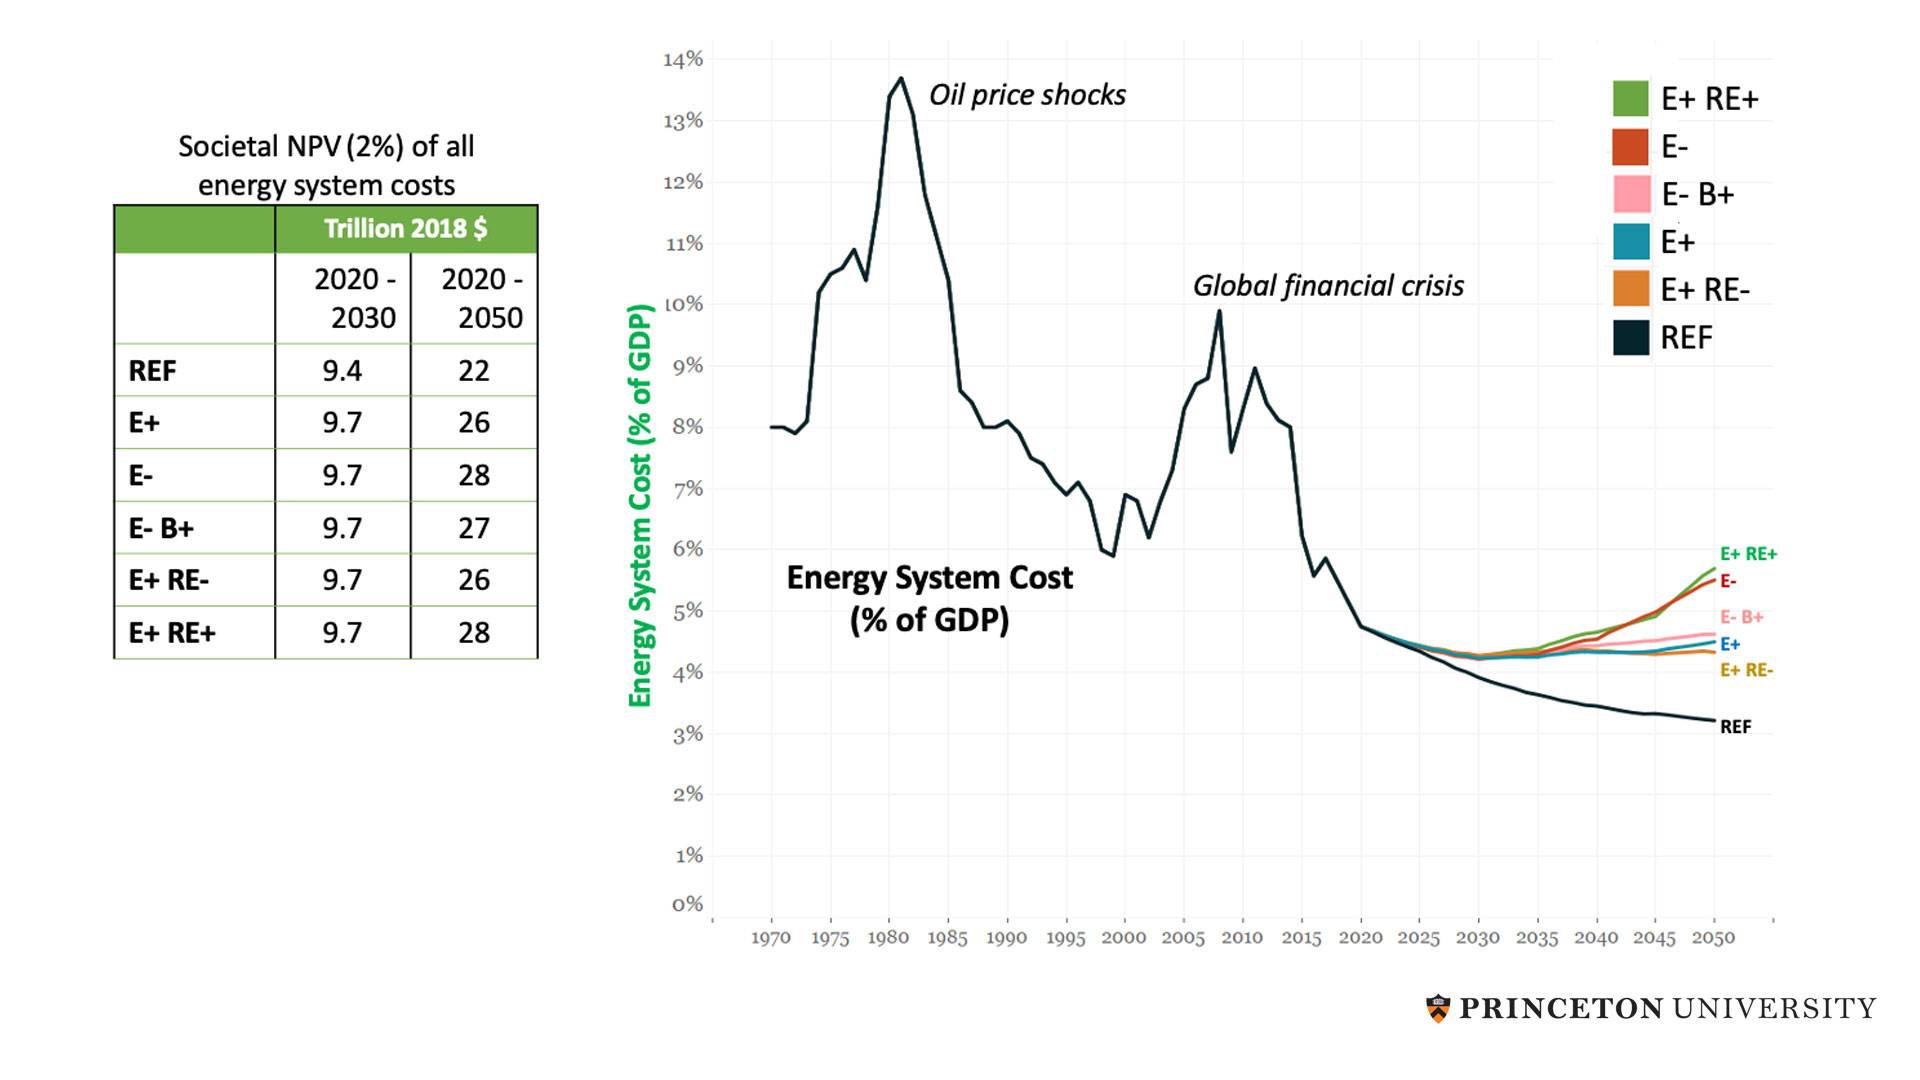 line graph showing jagged decline to energy system costs (%GDP), including oil price shocks and global financial crisis. Societal NPV (2%) of all energy system costs. In trillions 2018 $. REF: 2020-30: 9.4, 2020-50: 22. E+: 2020-30: 9.7, 2020-50: 26. E-: 2020-30: 9.7, 2020-50: 28. E- B+: 2020-30: 9.7, 2020-50: 27. E+ RE-: 2020-30: 9.7, 2020-50: 26. E+RE+: 2020-30: 9.7, 2020-50: 28.